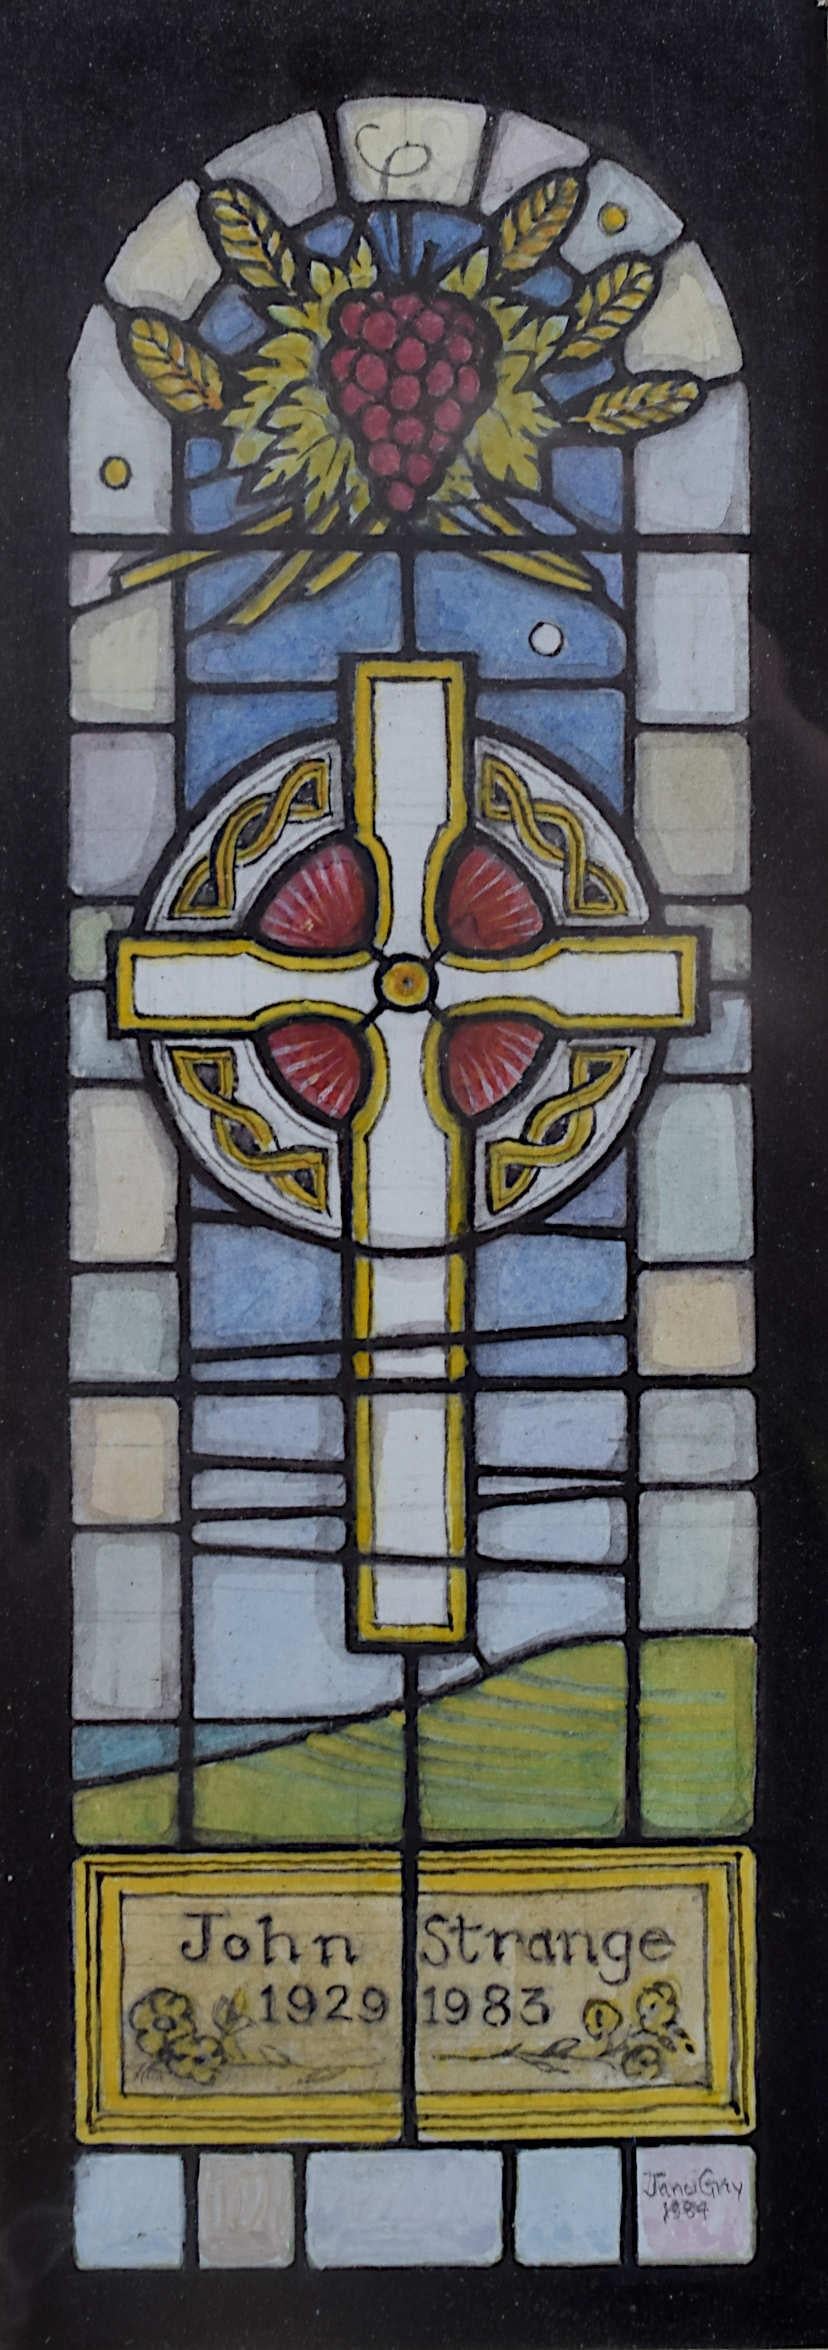 We acquired a series of watercolour stained glass designs from Jane Gray's studio. To find more scroll down to "More from this Seller" and below it click on "See all from this seller." 

Jane Gray (b.1931)
Stained Glass Design
Watercolour
17 x 6.5